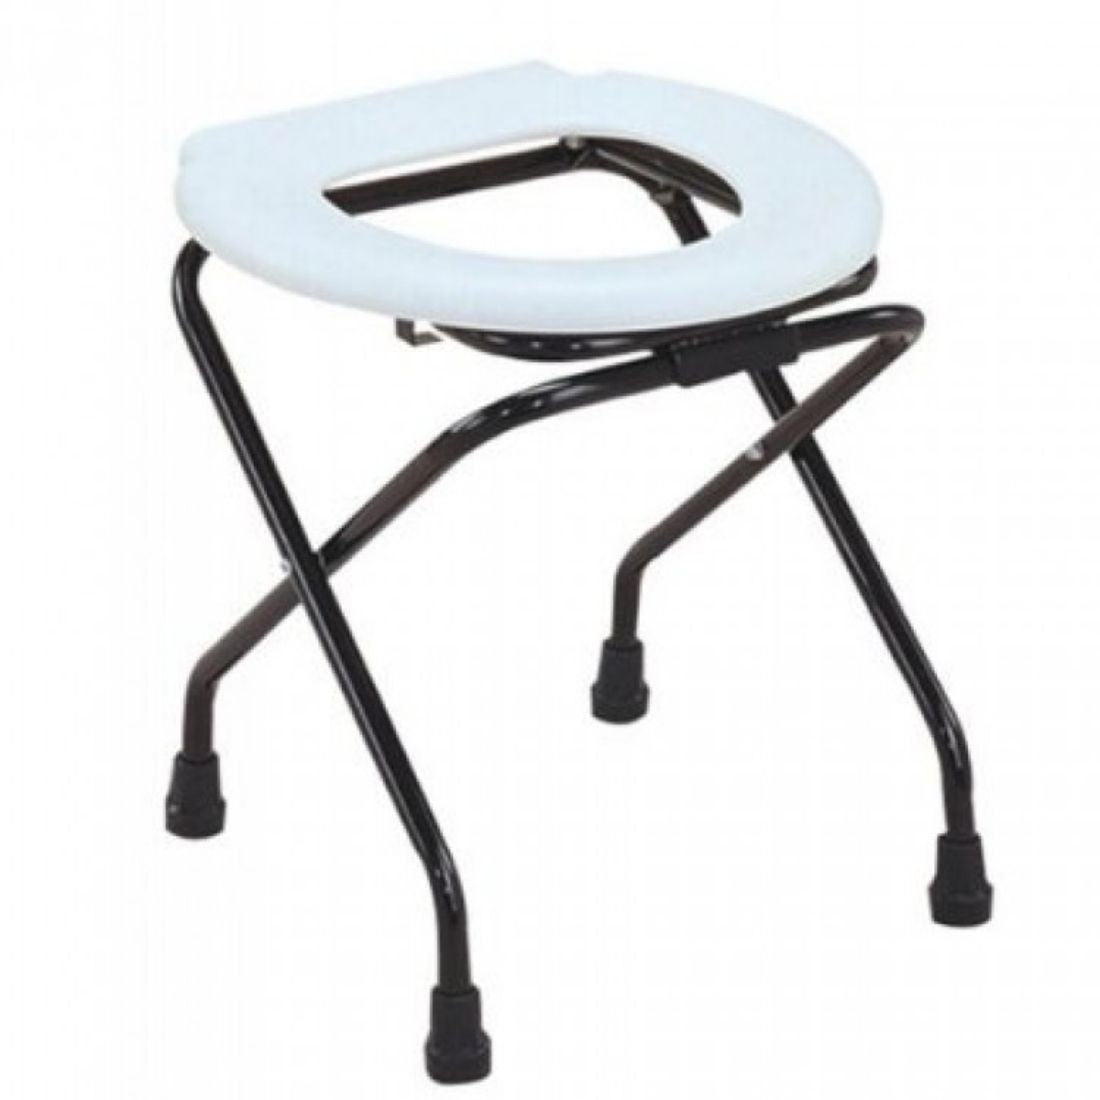 Commode Stool - Foldable with Locking Mechanism